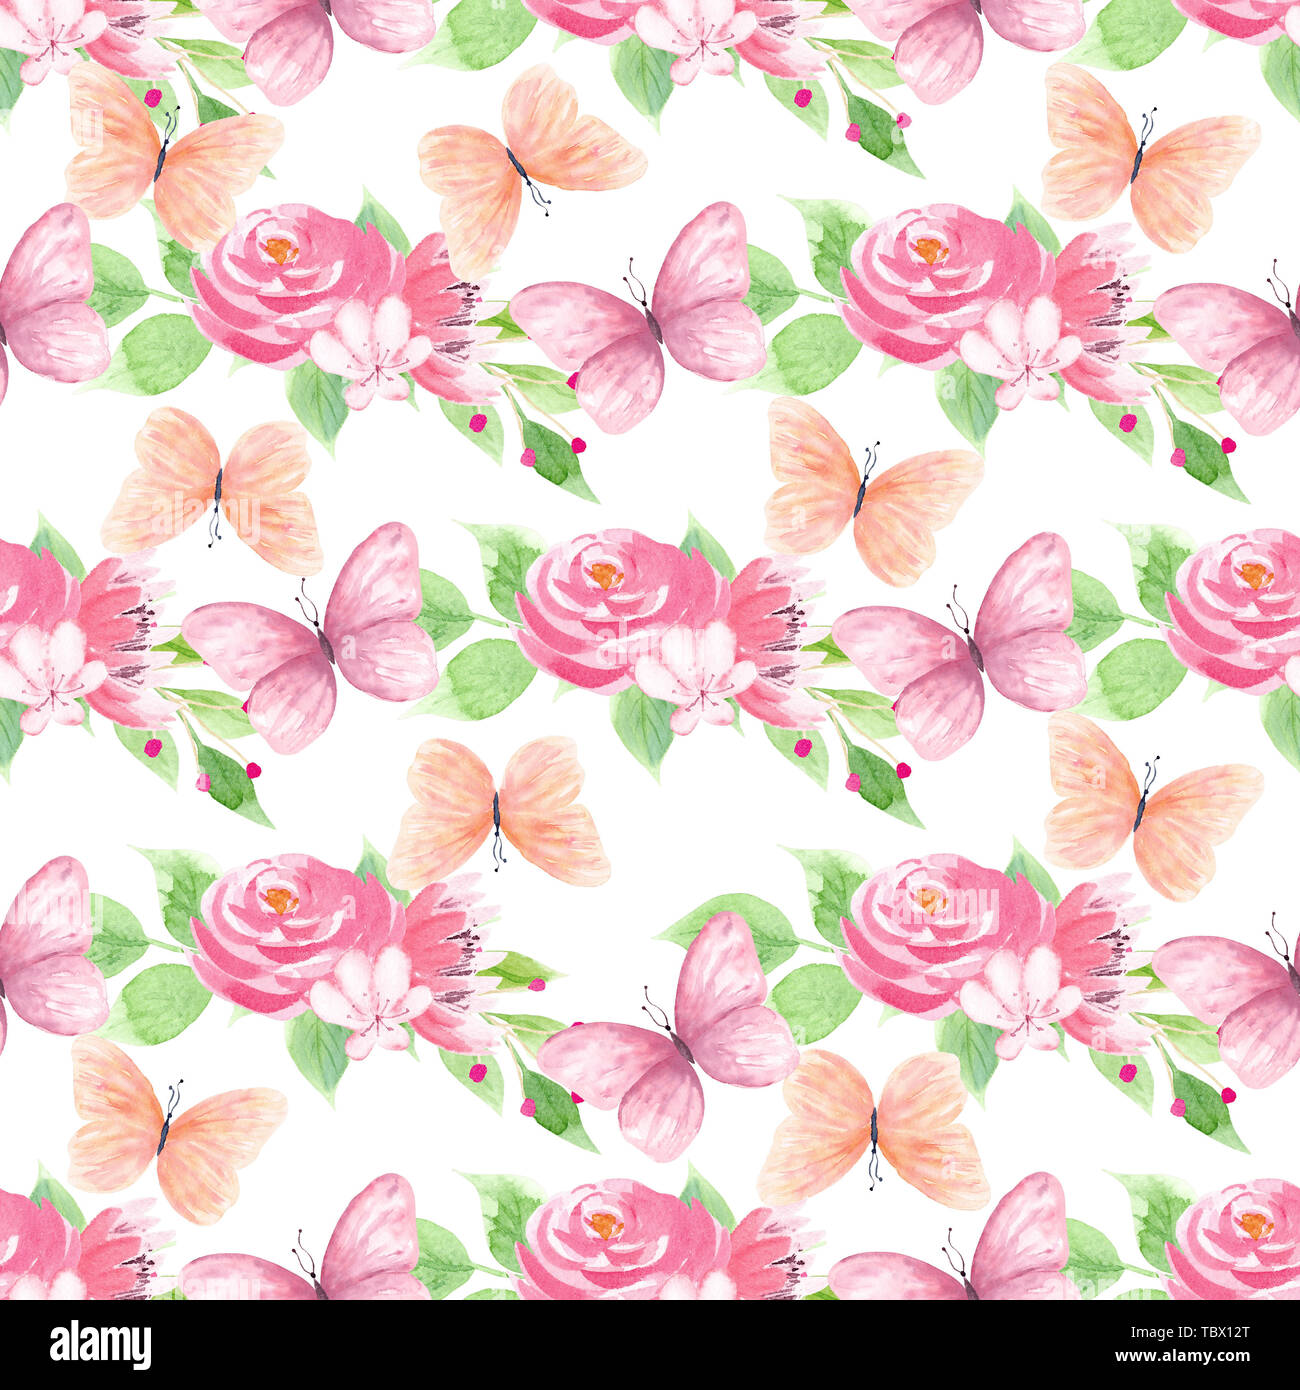 Butterflies and spring blossom seamless pattern Stock Photo